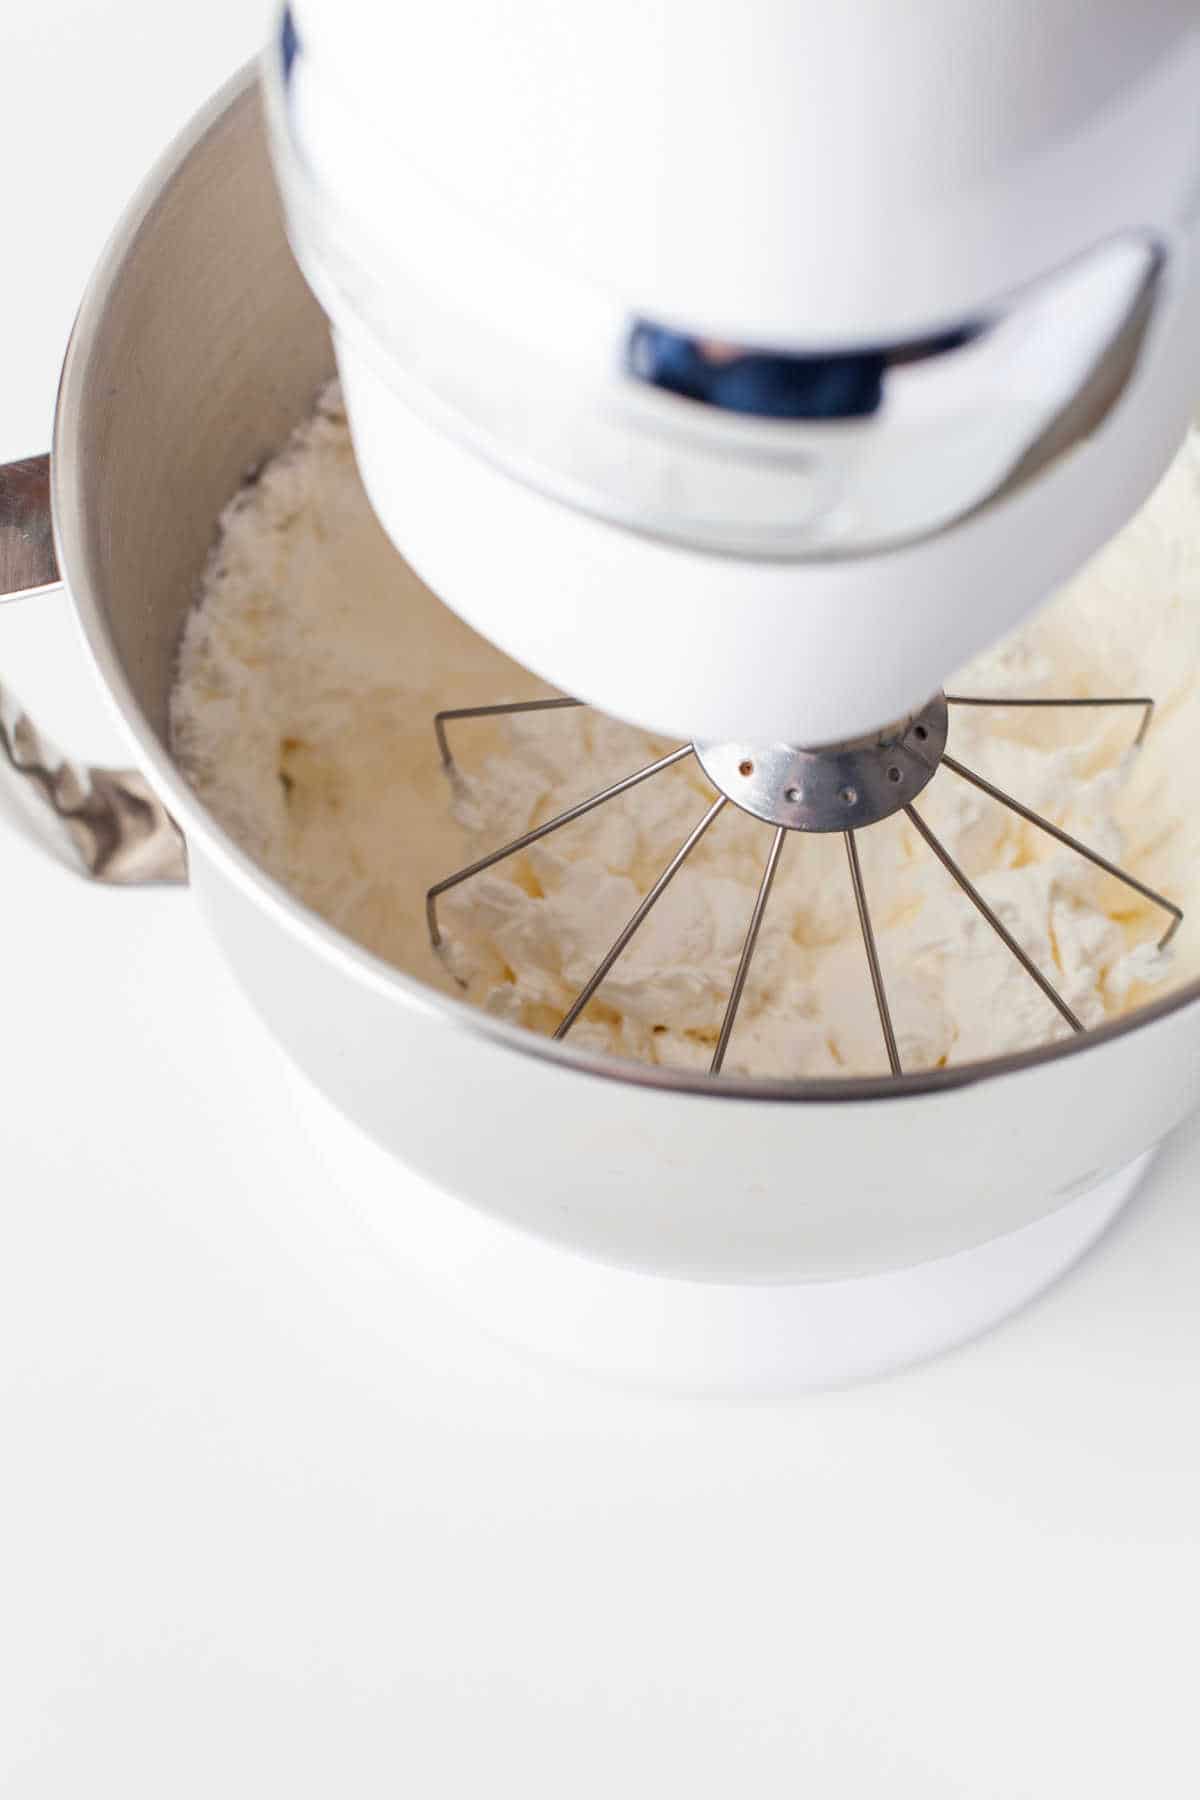 Whipped cream mixing in a stand mixer. 